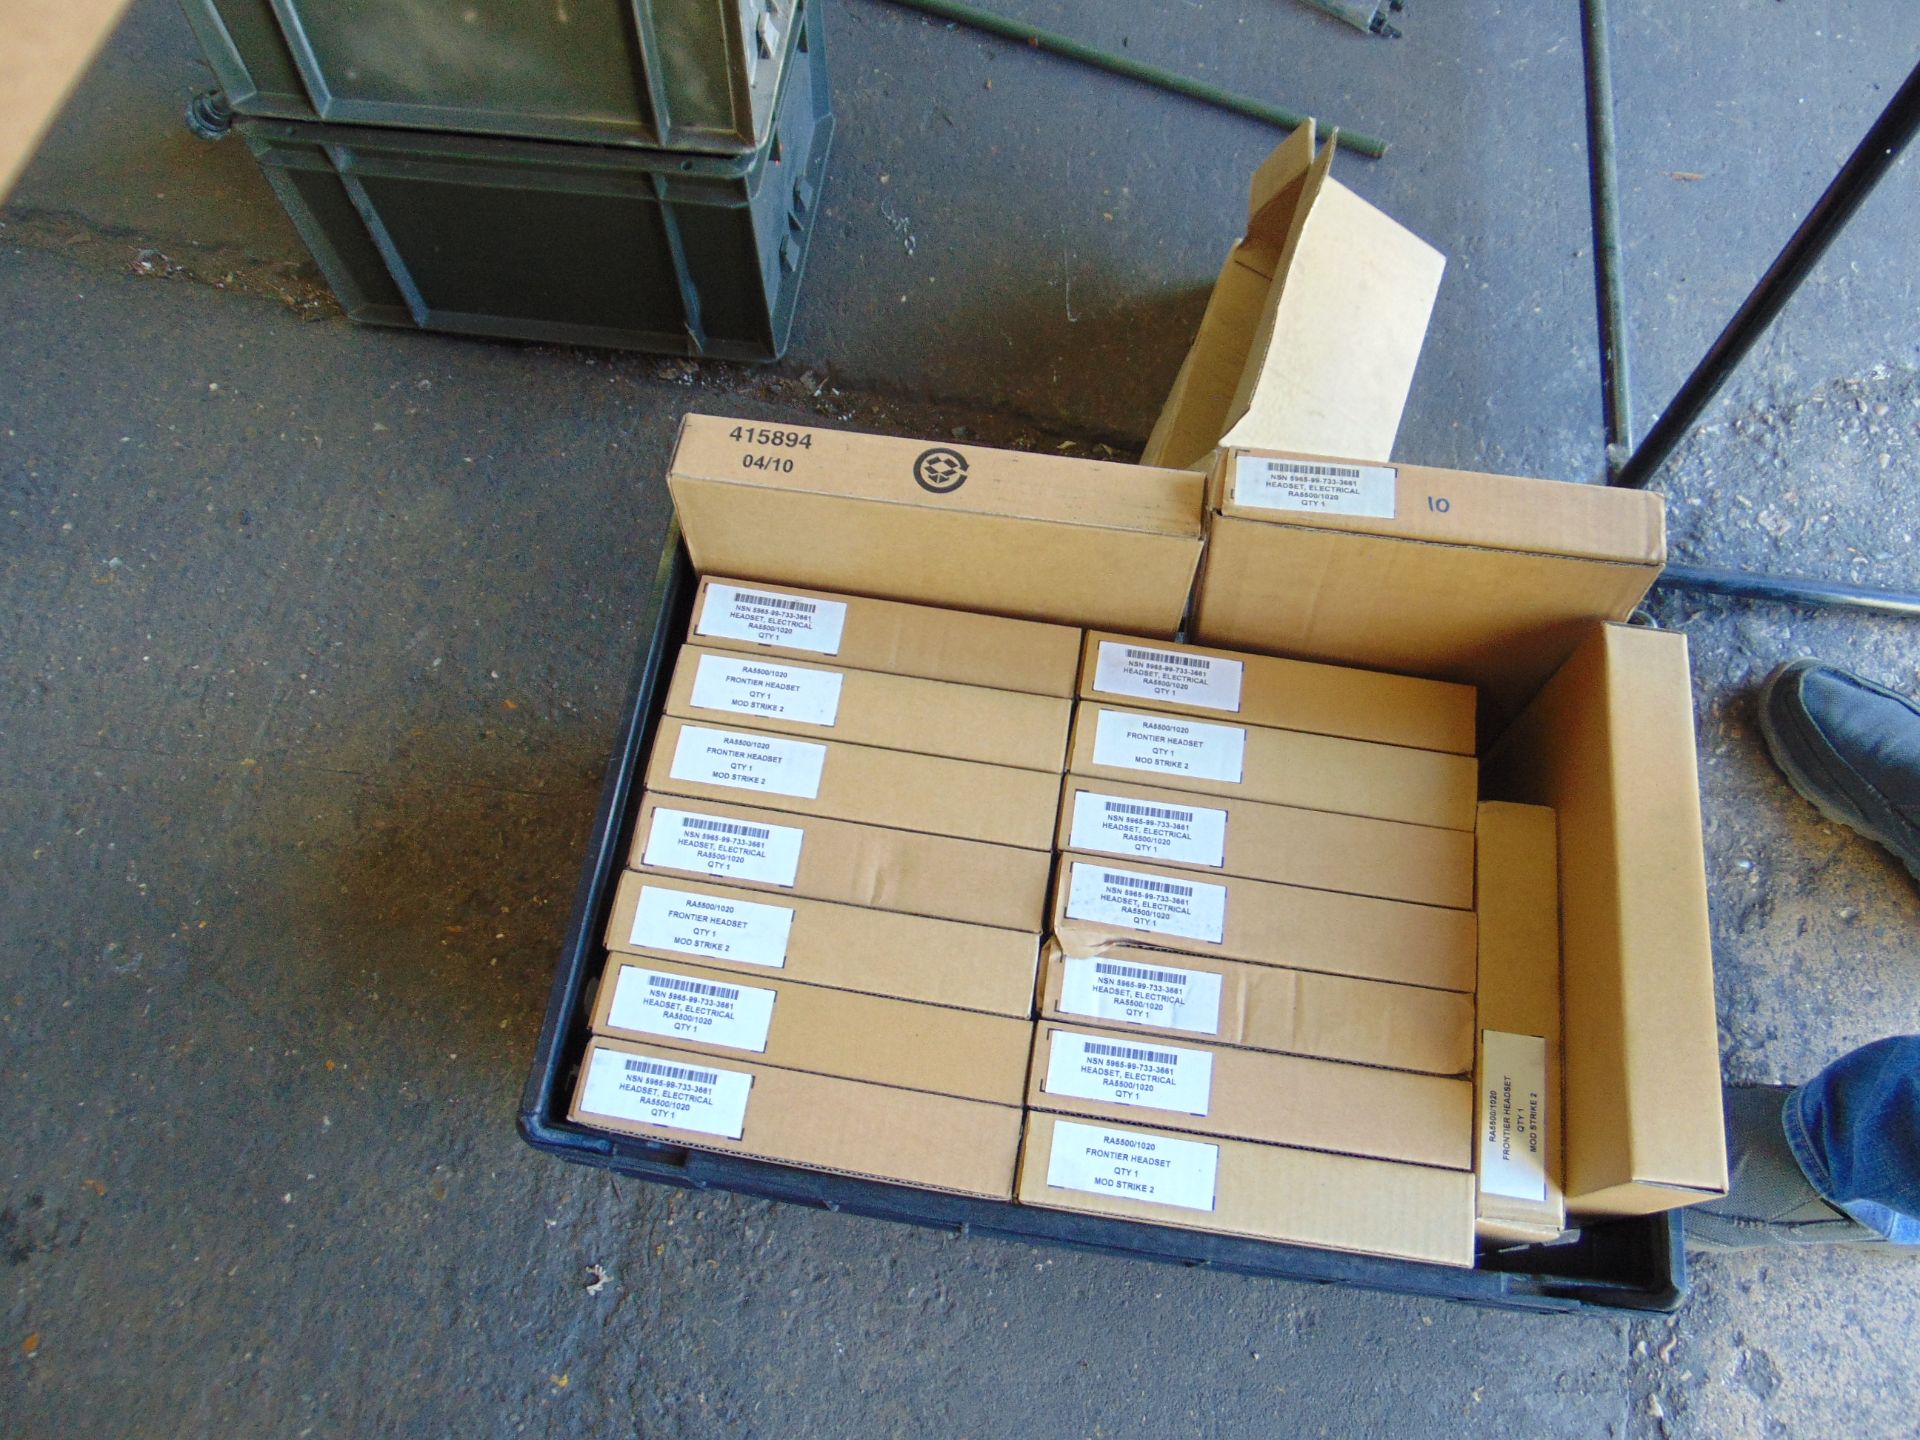 20X NEW UNISSUED FRONTIER 1000 HEADSET COMMS SYSTEMS IN ORIGINAL PACKING WITH MANUAL - Image 2 of 6